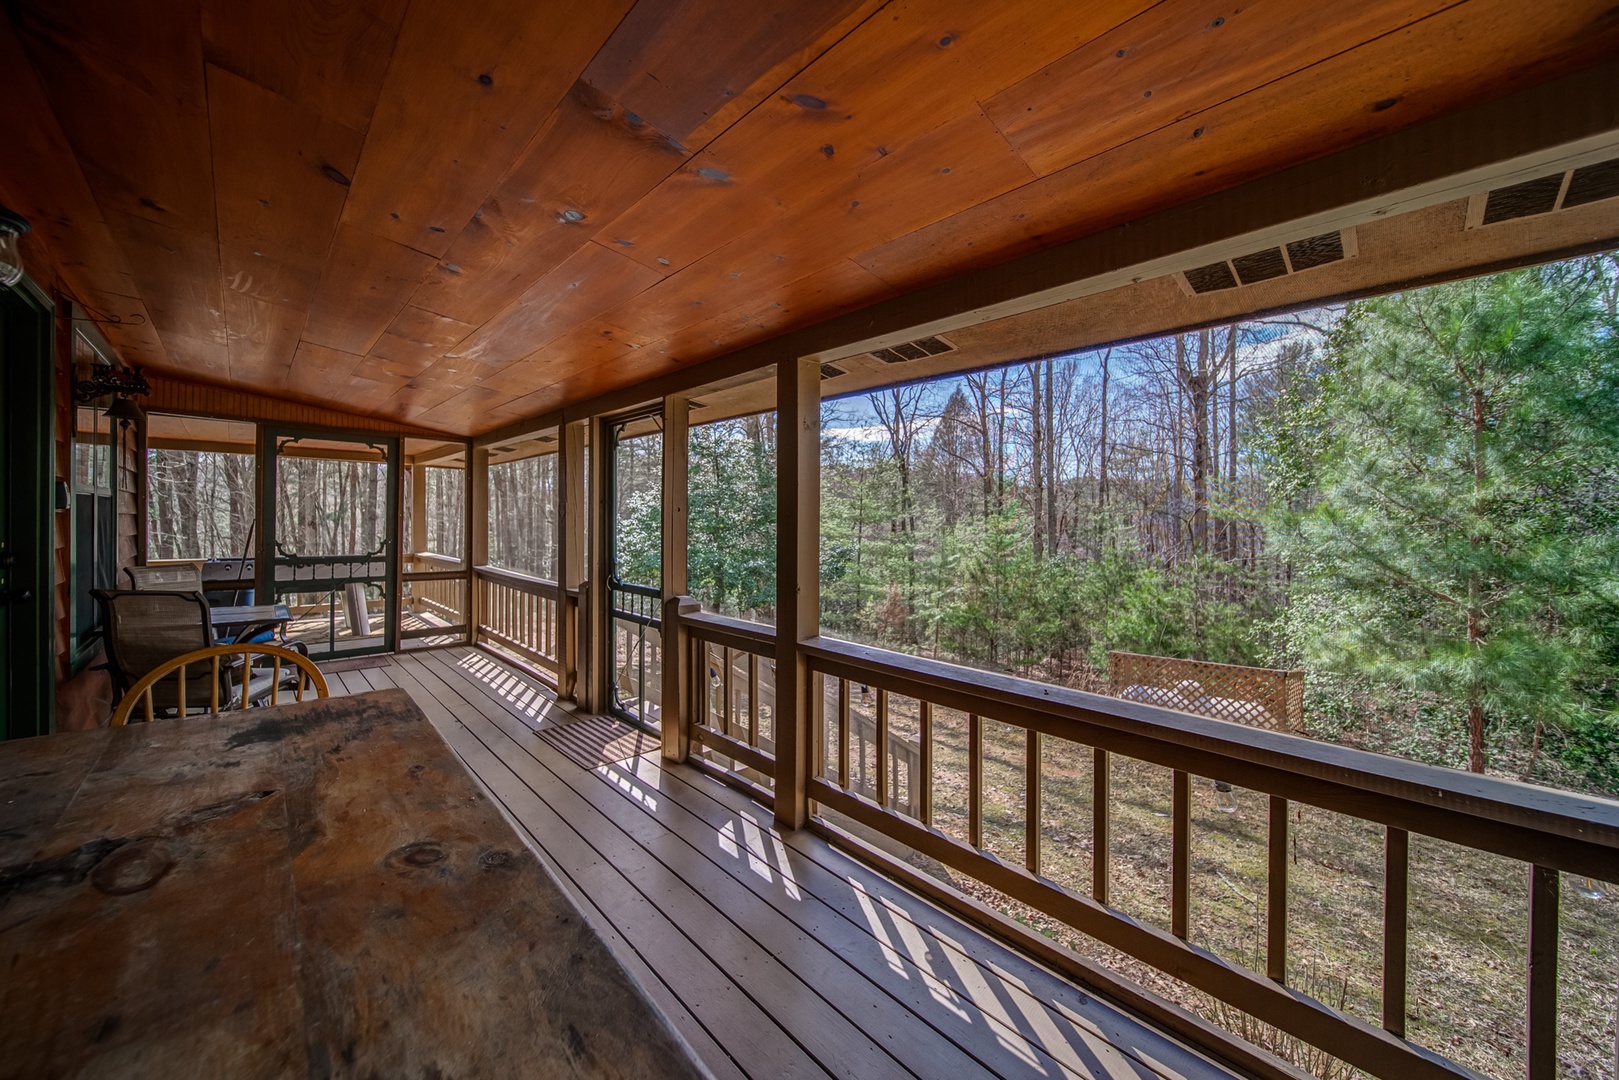 Gorgeous nature views will delight from the comfort of the screened porch